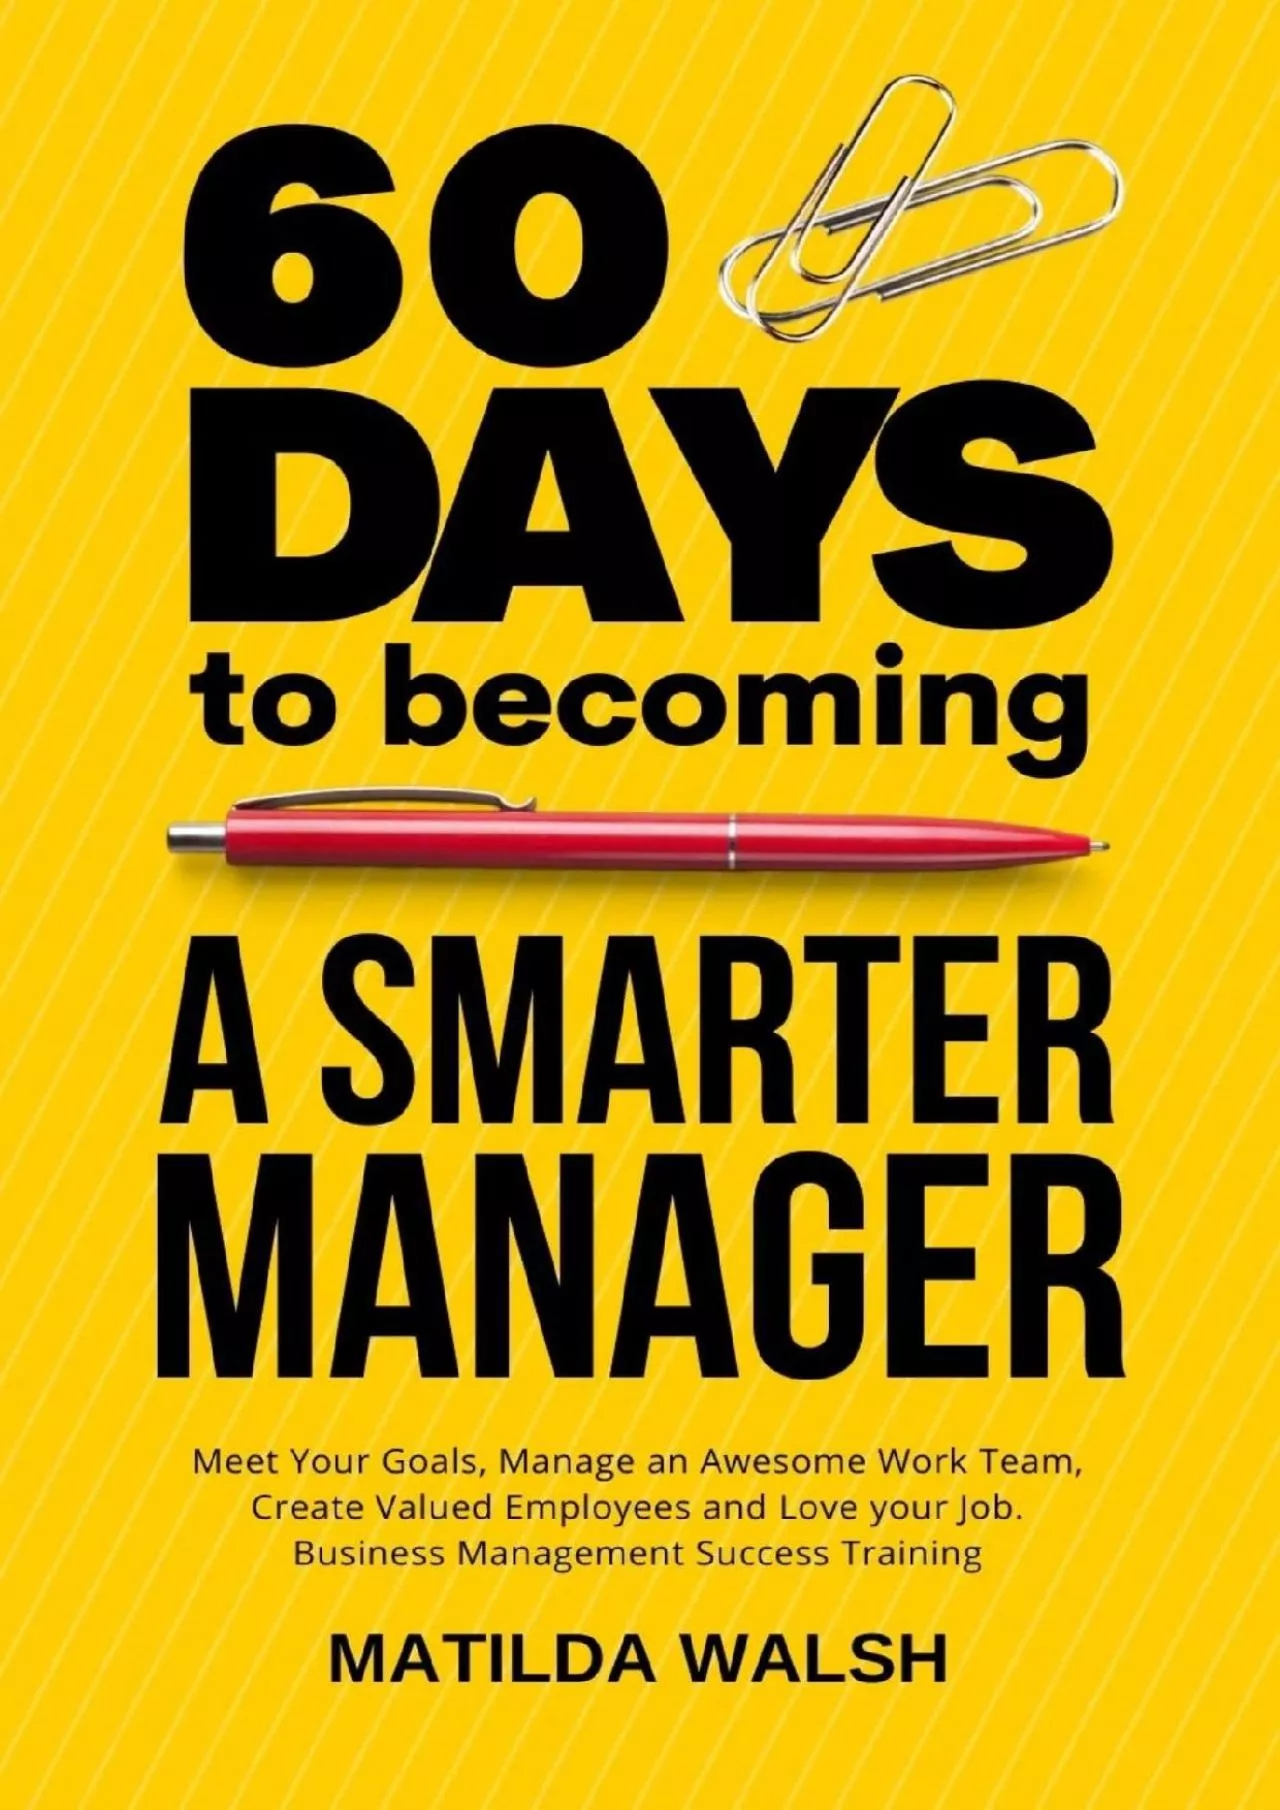 60 Days to Becoming a Smarter Manager - How to Meet Your Goals Manage an Awesome Work